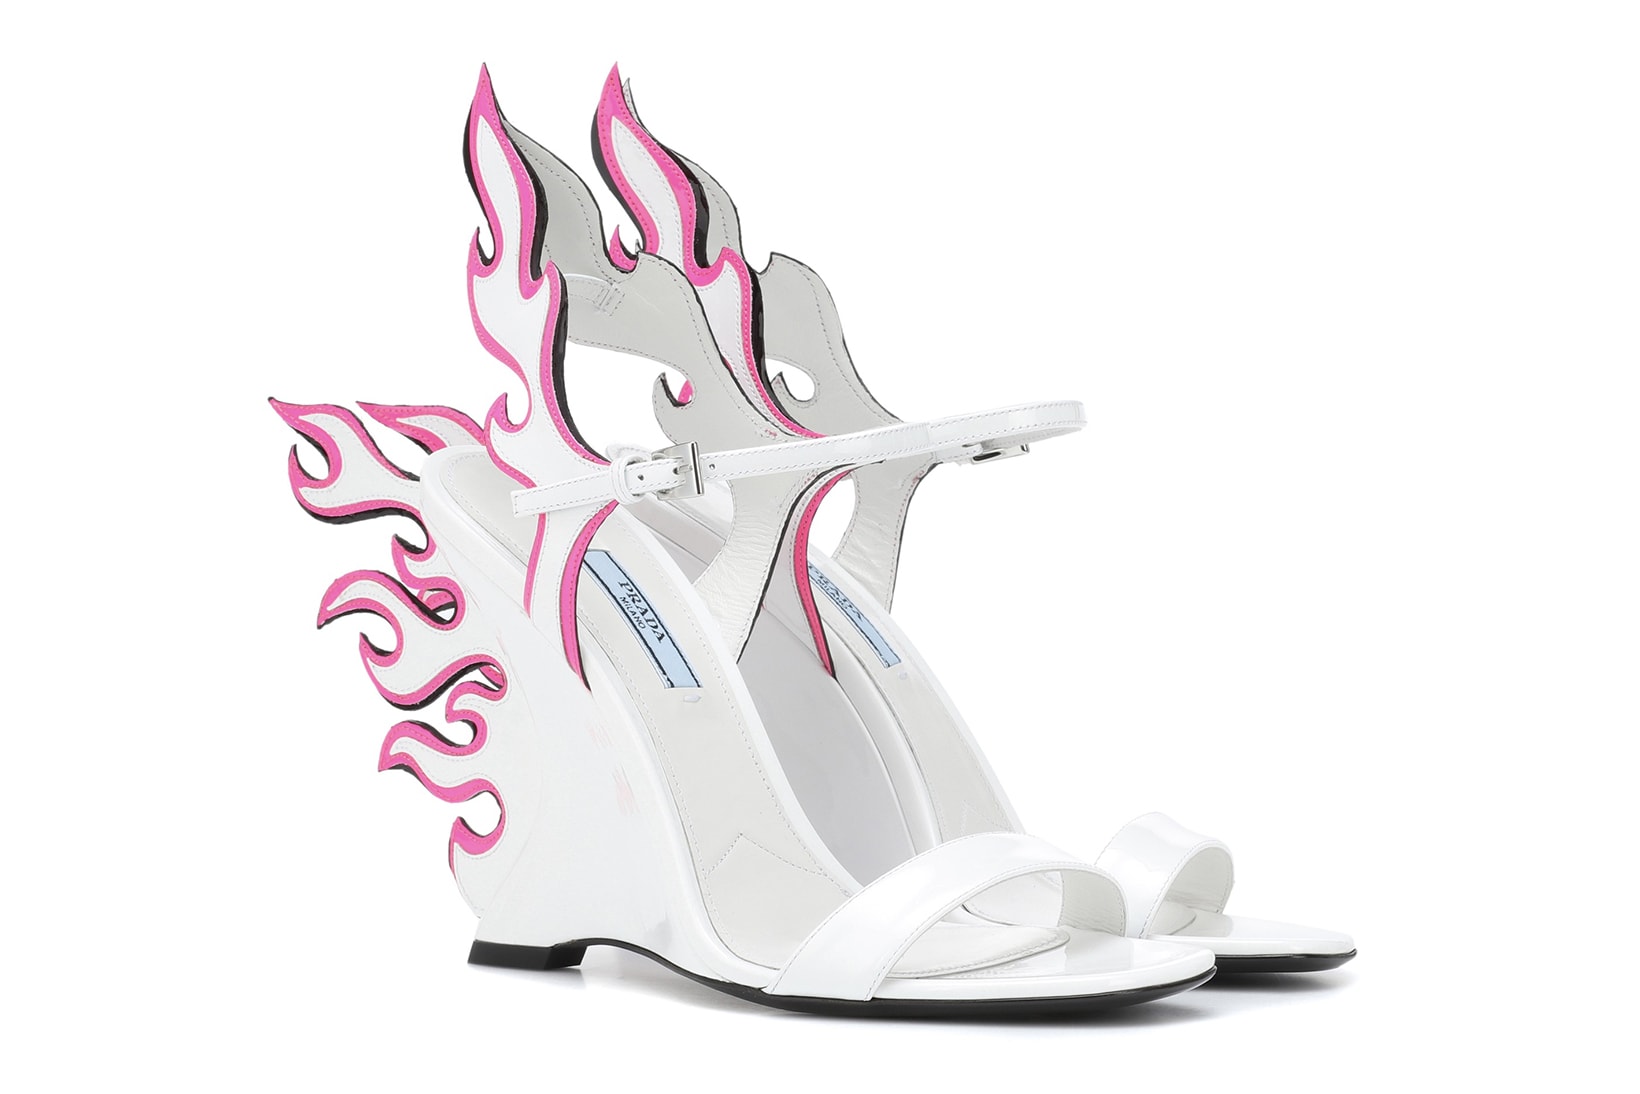 Prada drops White and Neon Pink Flame Sandals